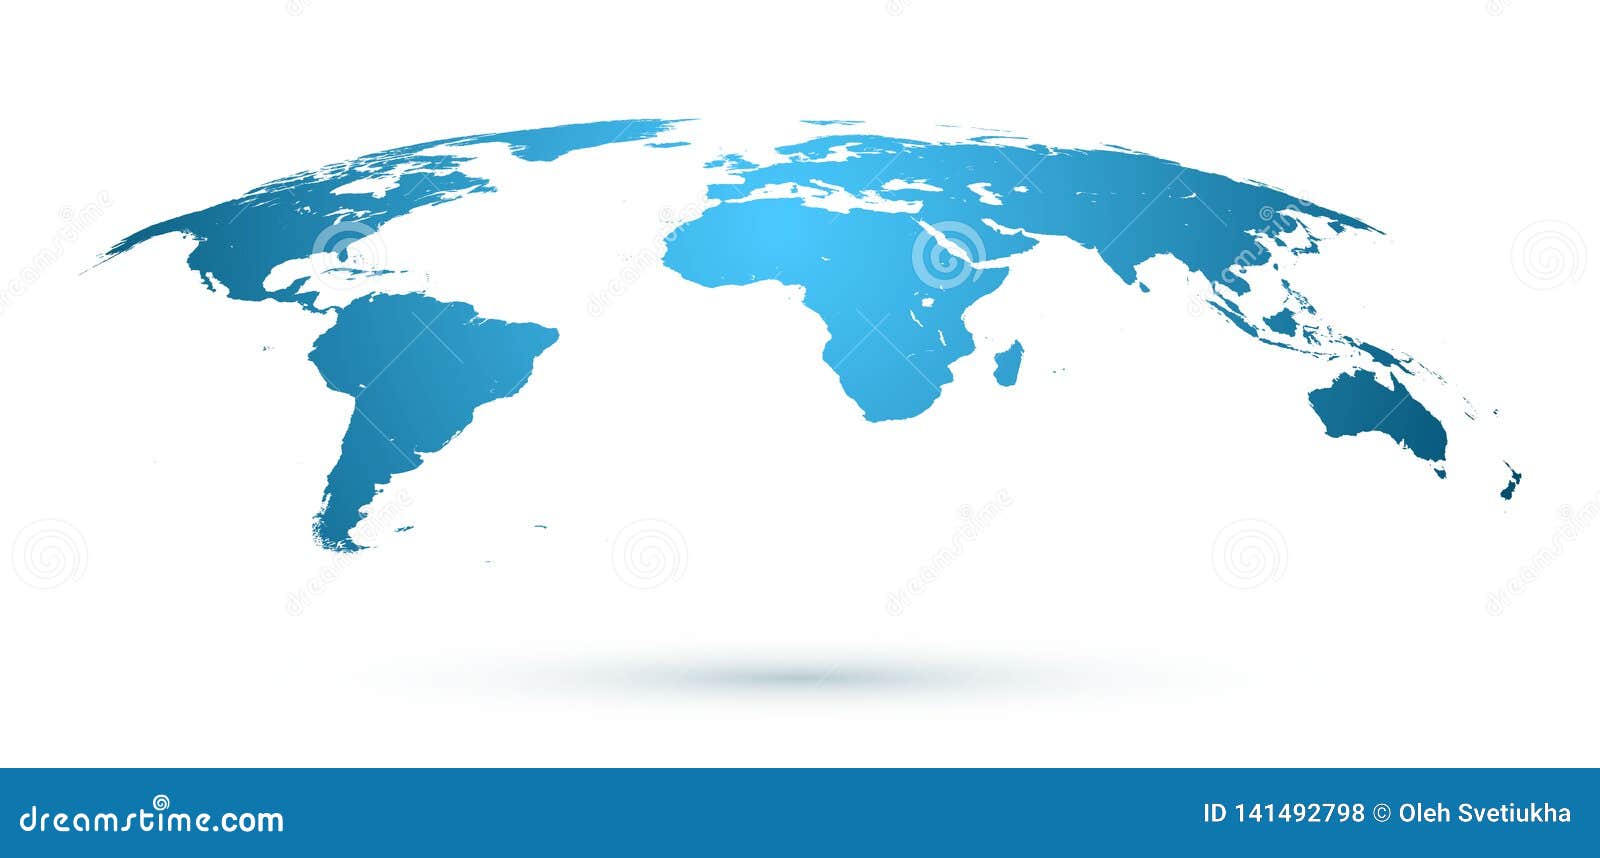 Background Map White World Stock Illustrations 142 341 Background Map White World Stock Illustrations Vectors Clipart Dreamstime